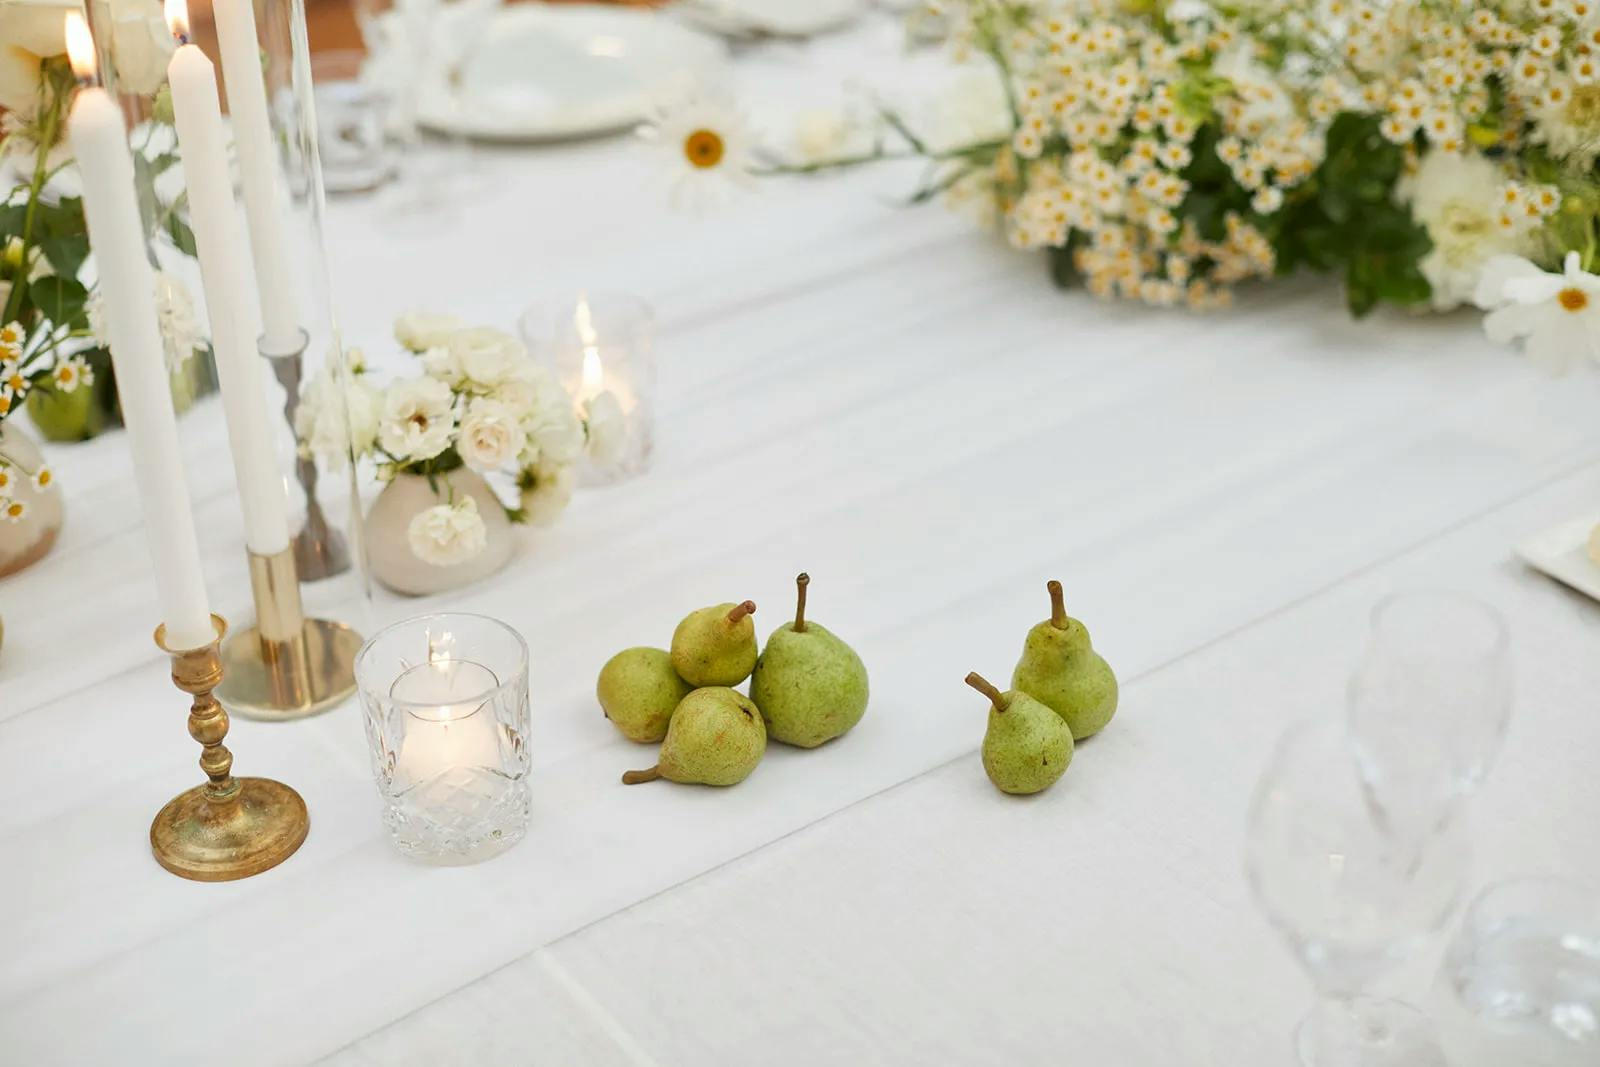 Wedding table with pears and flowers on it